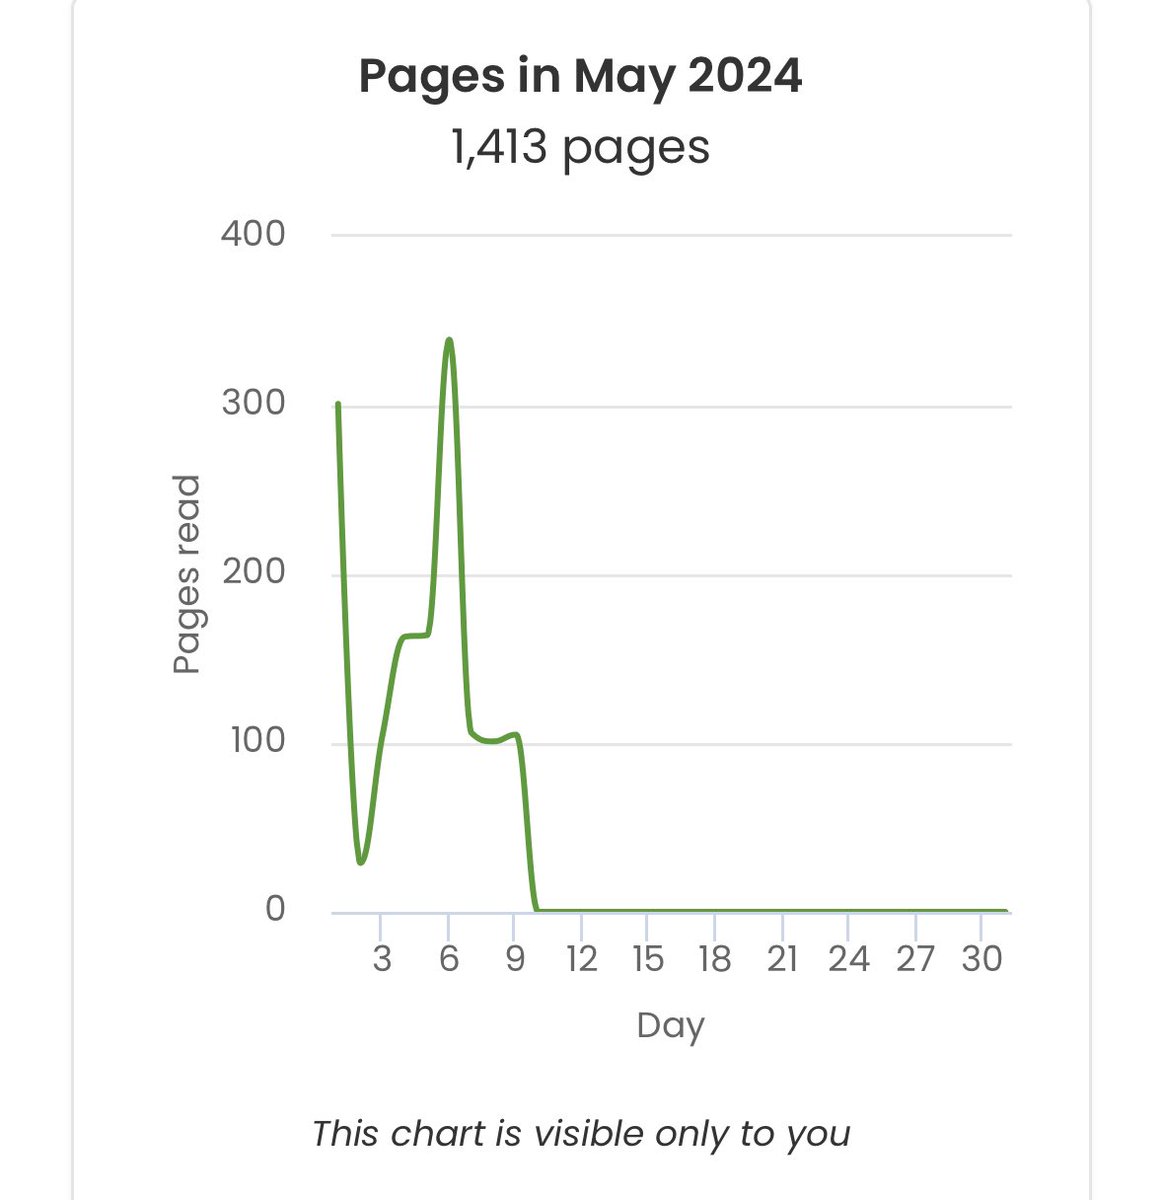 Trying to get back to setting myself a goal of reading minimum 100 pages per day because April was just awful 😂🤦🏻‍♀️ Only one day not completed so far this month - and I was too busy shopping that day 😁 #BookTwitter